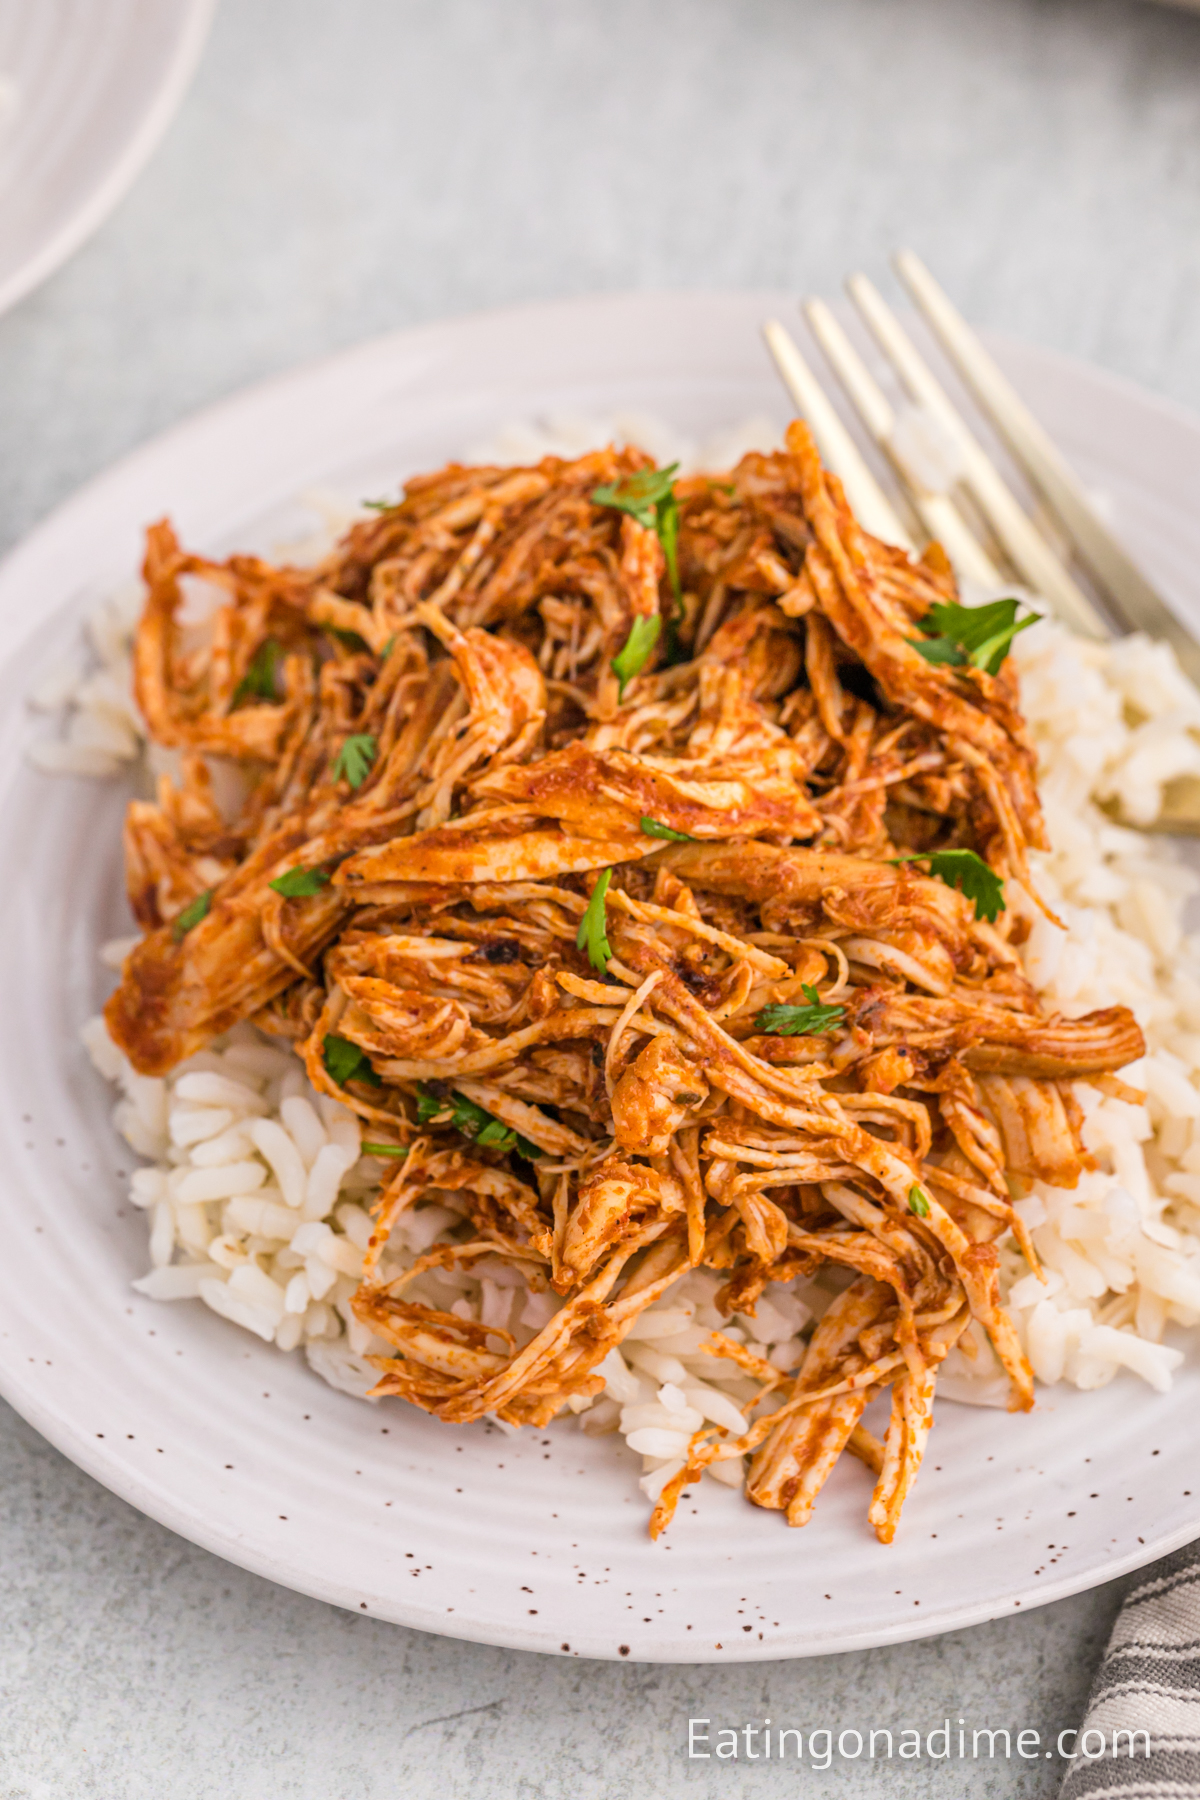 Chipotle Shredded Chicken over white rice on a plate with a fork